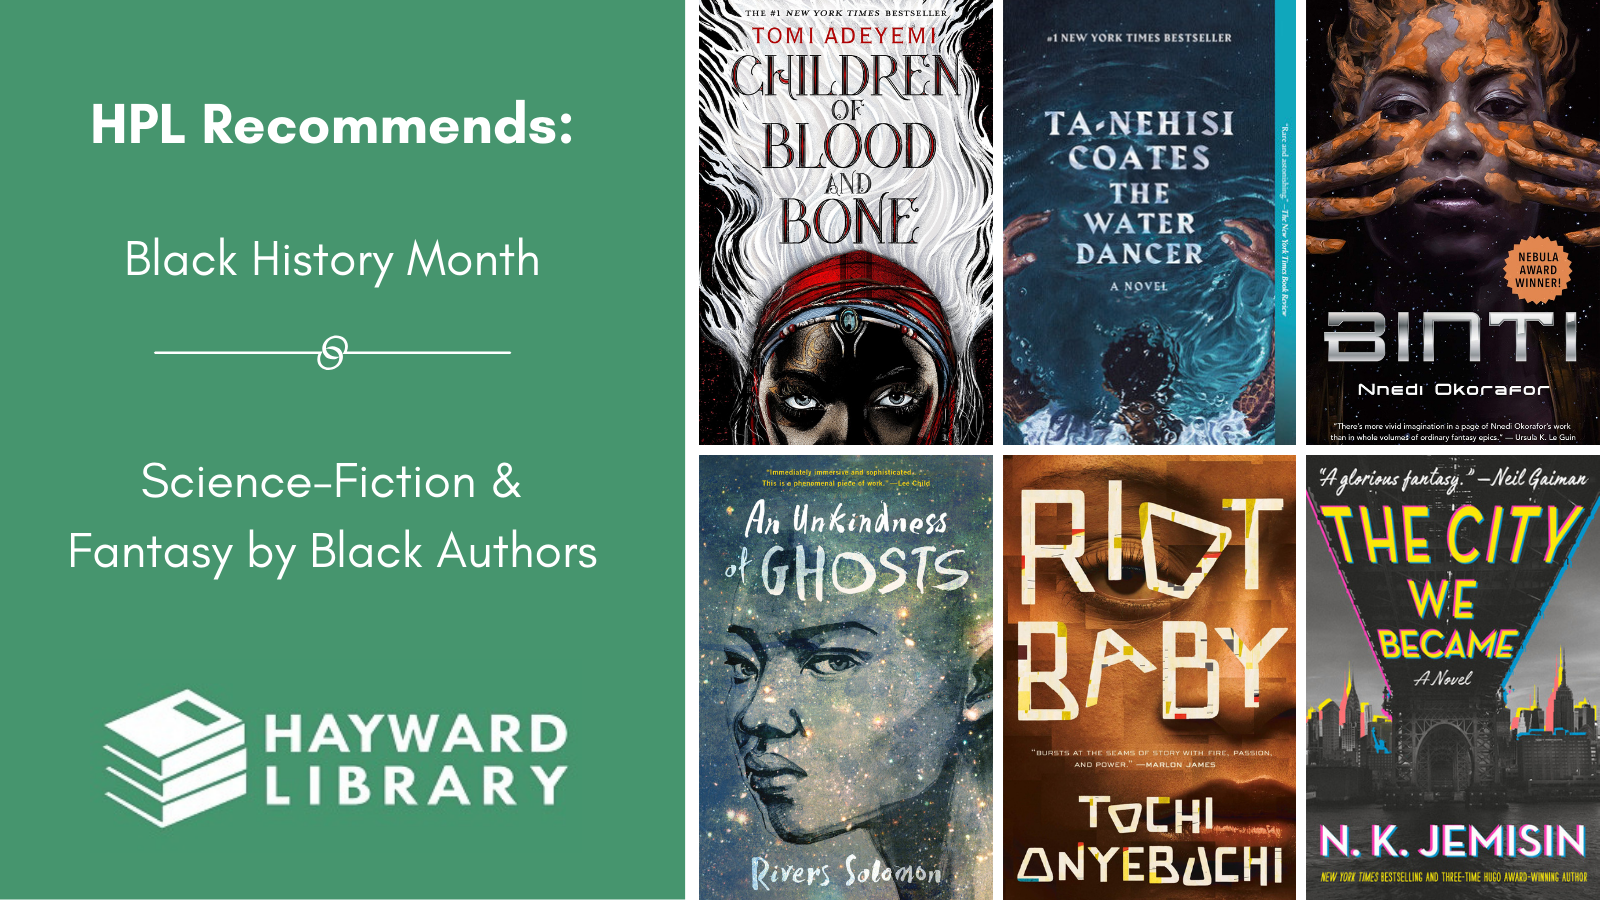 Collage of book covers with a green block on left side that says HPL Recommends, Black History Month, Science-Fiction & Fantasy by Black Authors in white text, with Hayward Library logo below it.